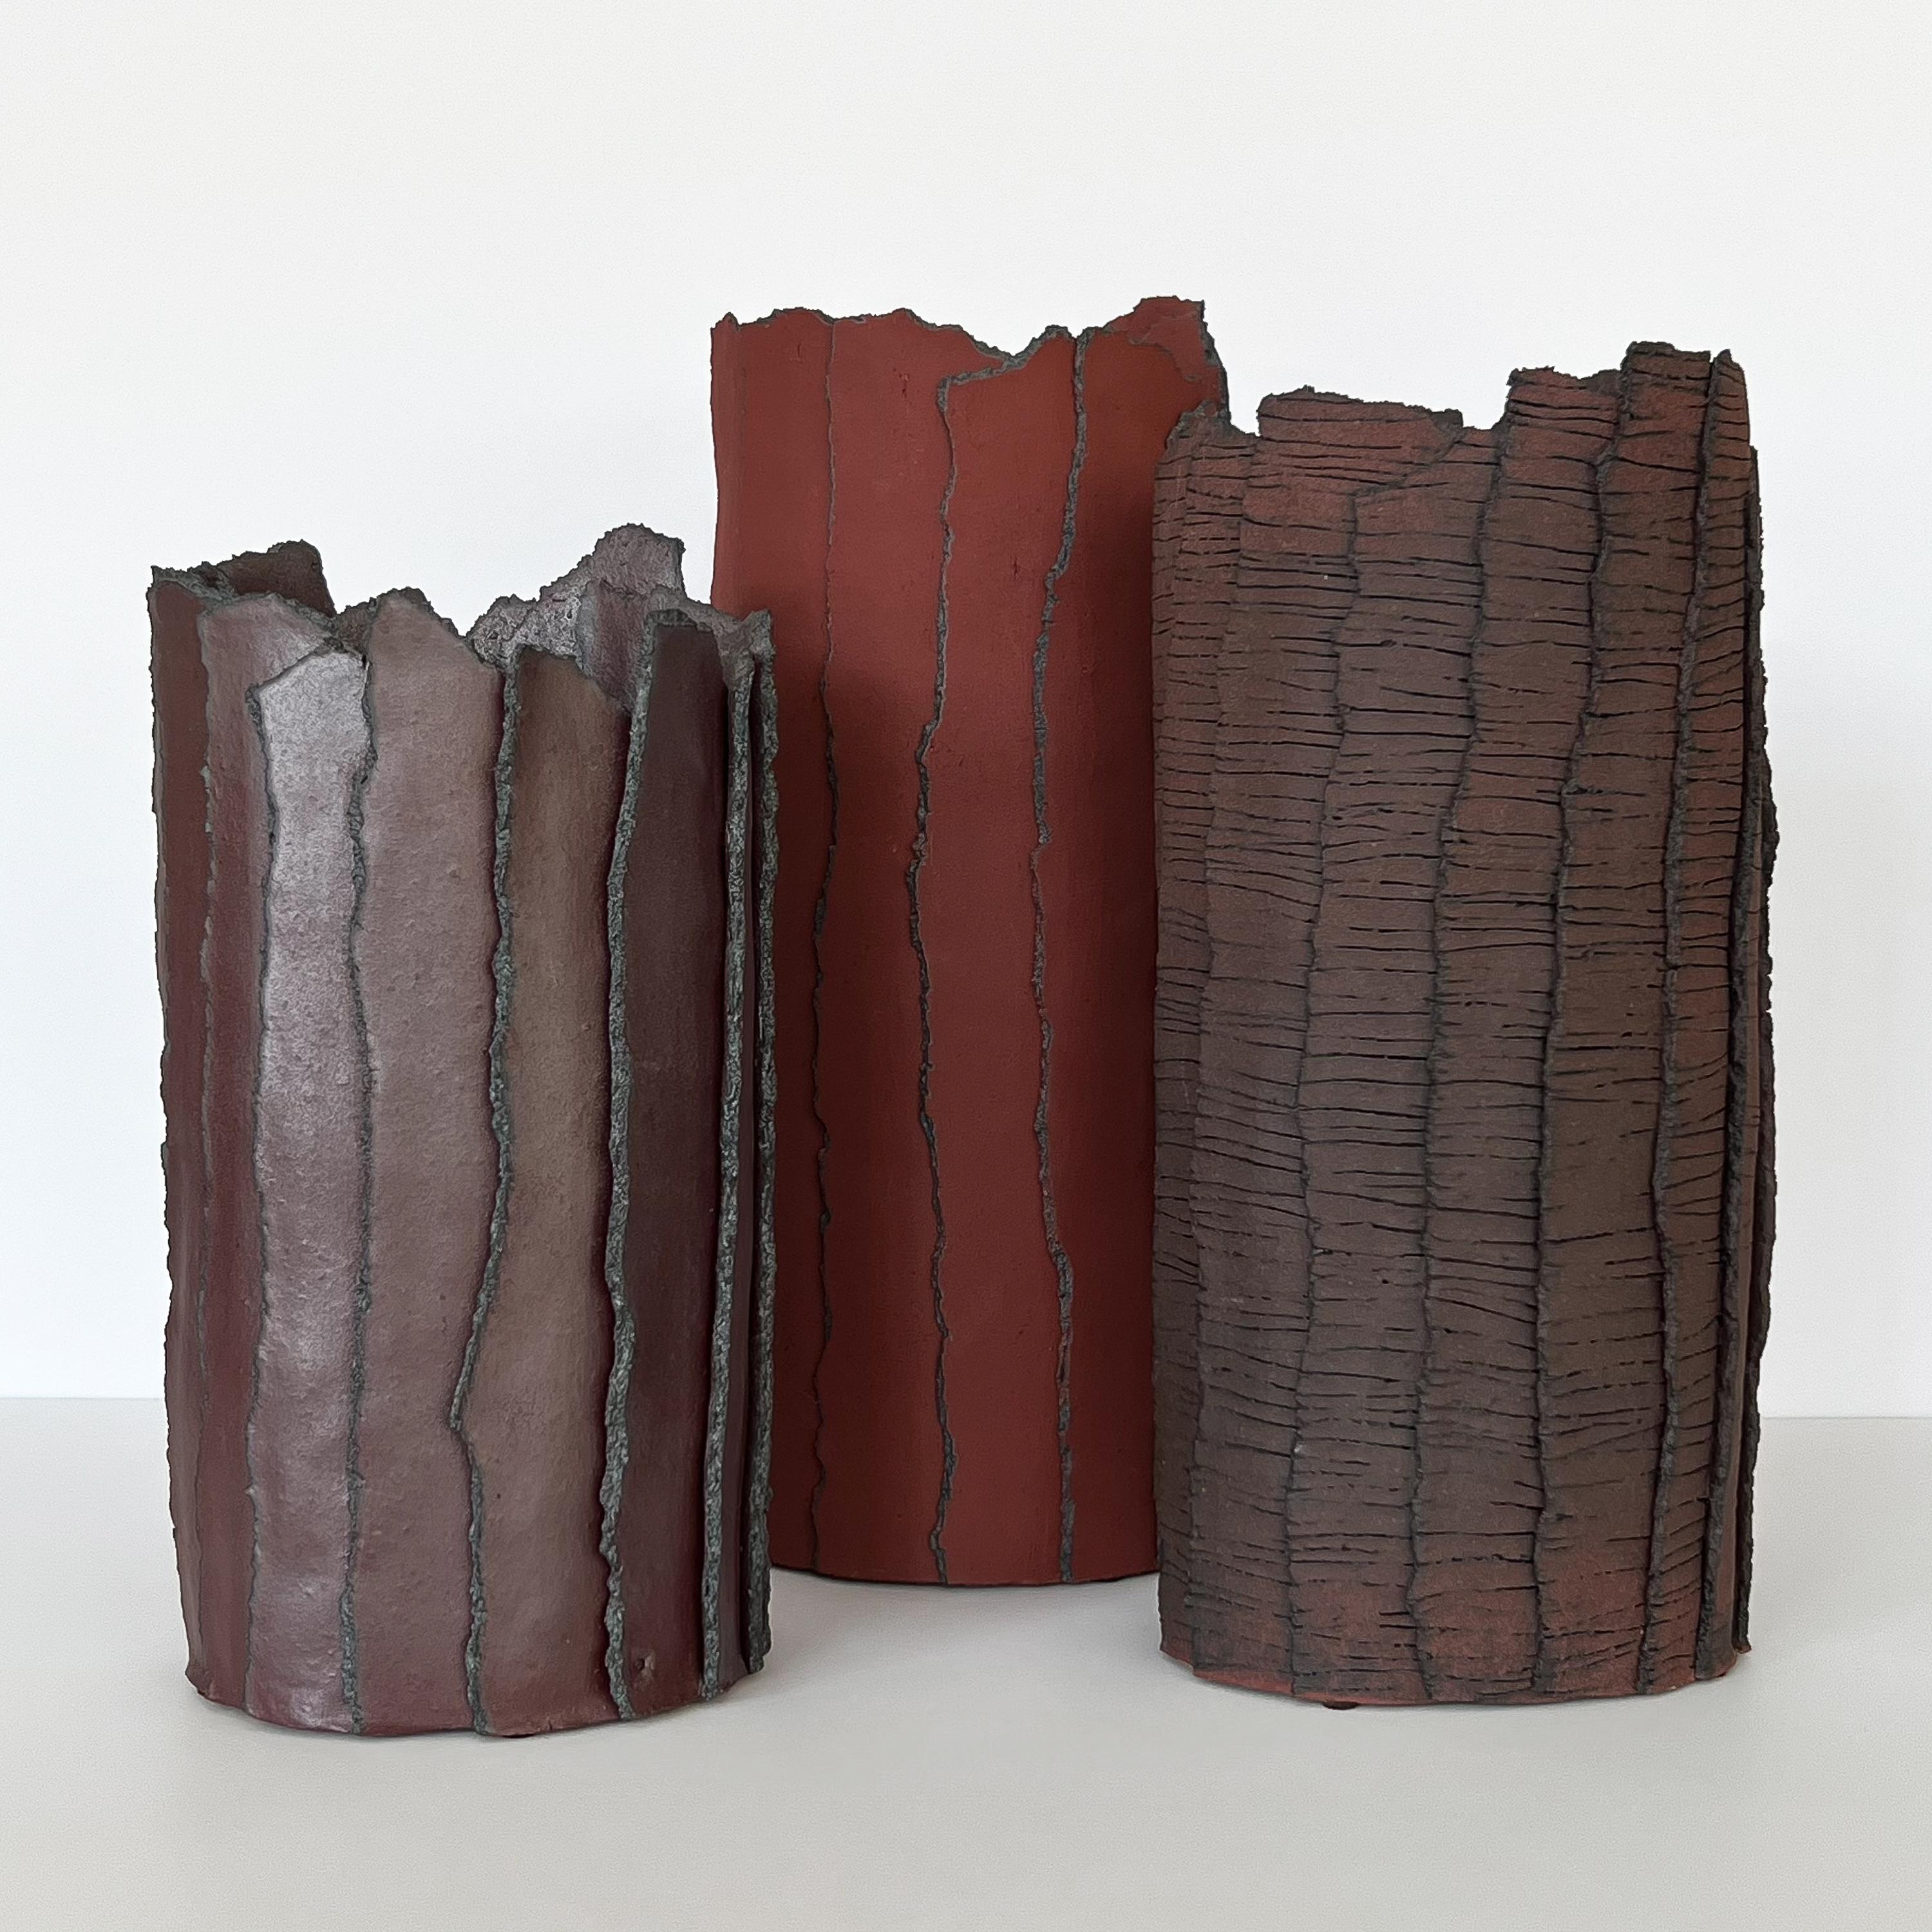 Glazed Set of 3 Brutalist Abstract Ceramic Cylinder Vases with Texture